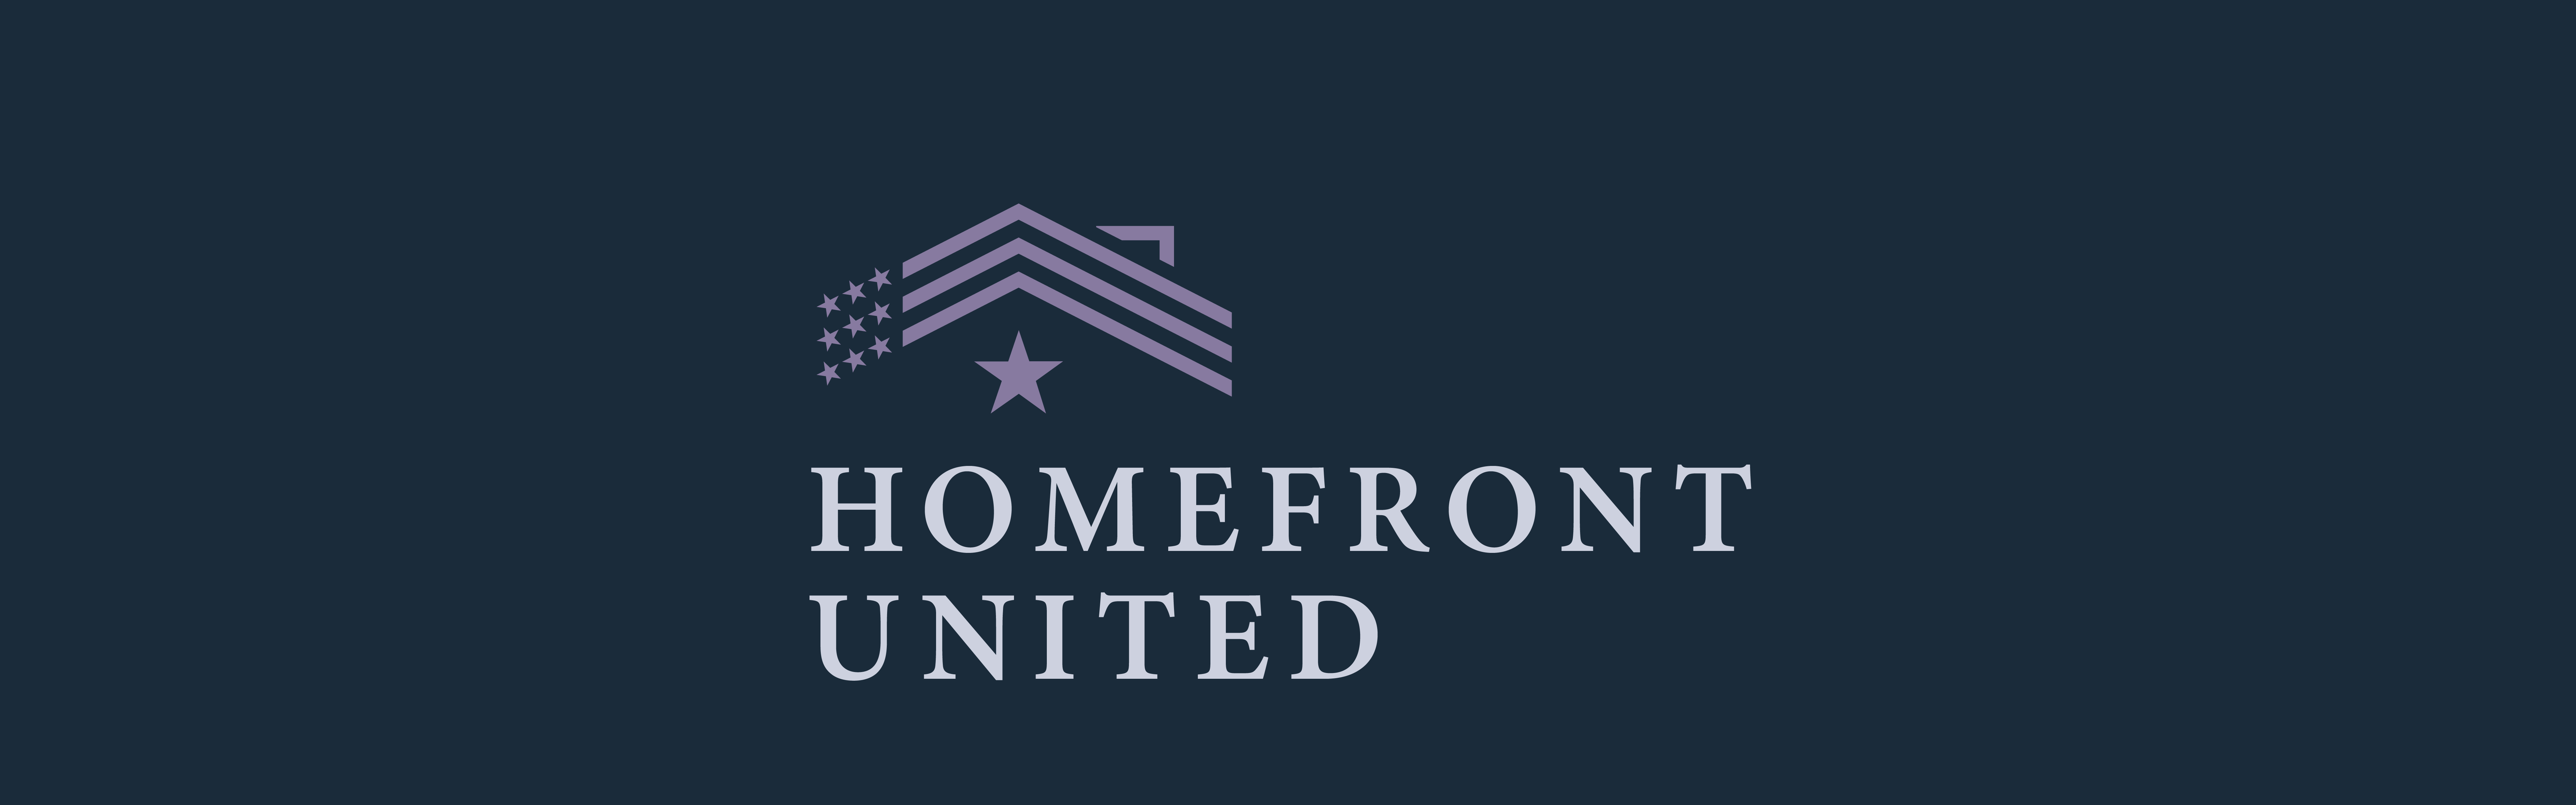 The image showcases a logo featuring the text "Homefront United" centrally located beneath a stylized illustration blending aspects of a house roofline with an American flag motif.